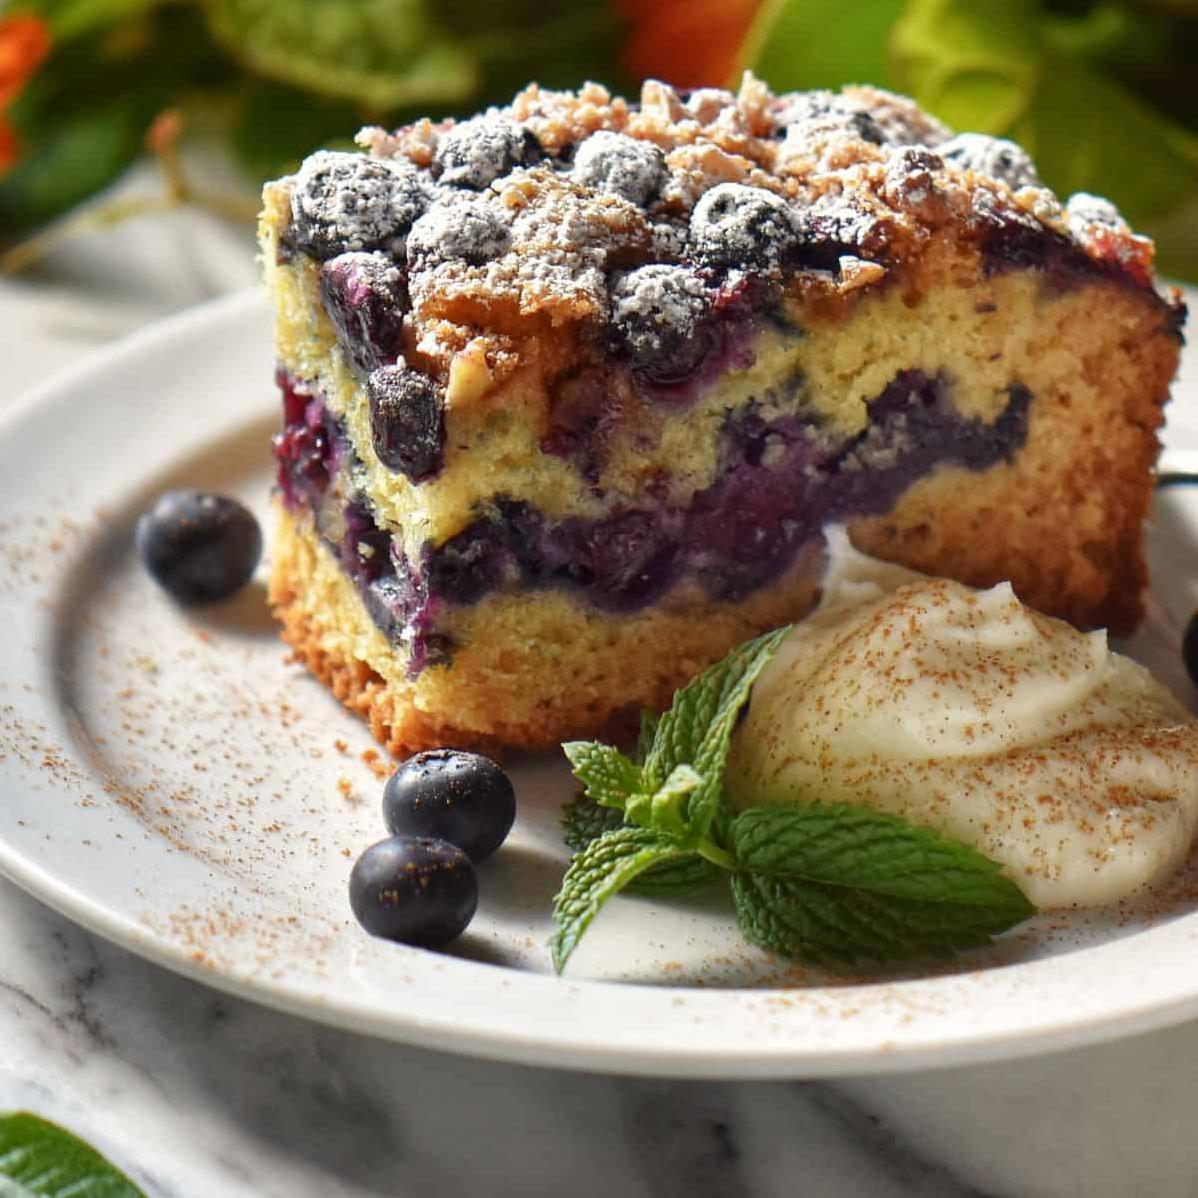 Wake Up to the Aroma of a Delicious Blueberry Coffee Cake